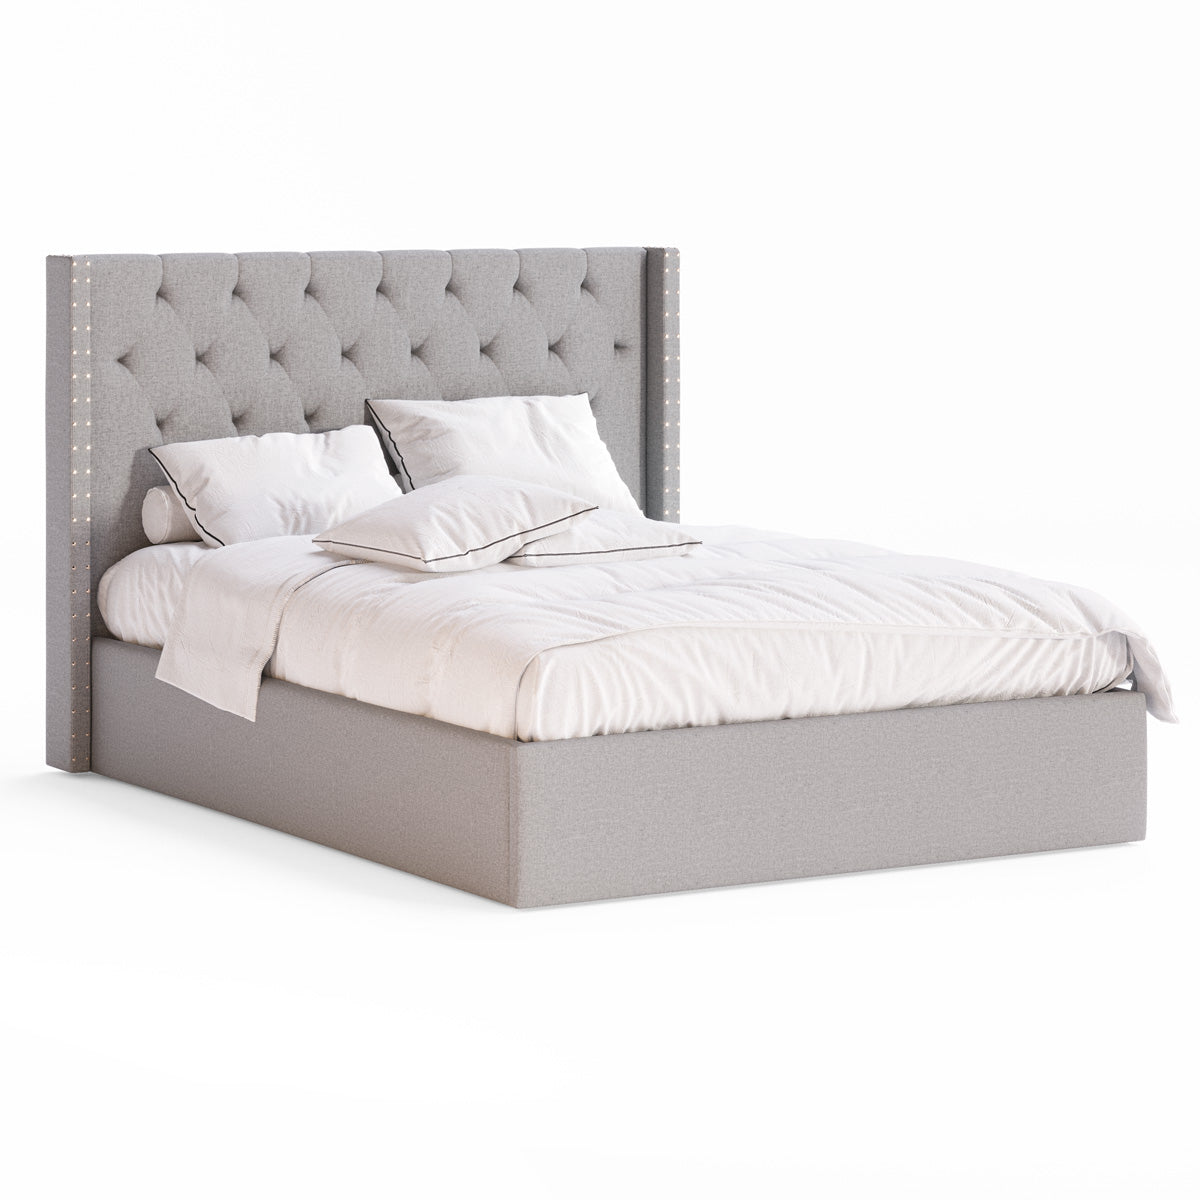 Leonora Gas Lift Storage Wing Bed Frame with Studs (Grey Fabric)